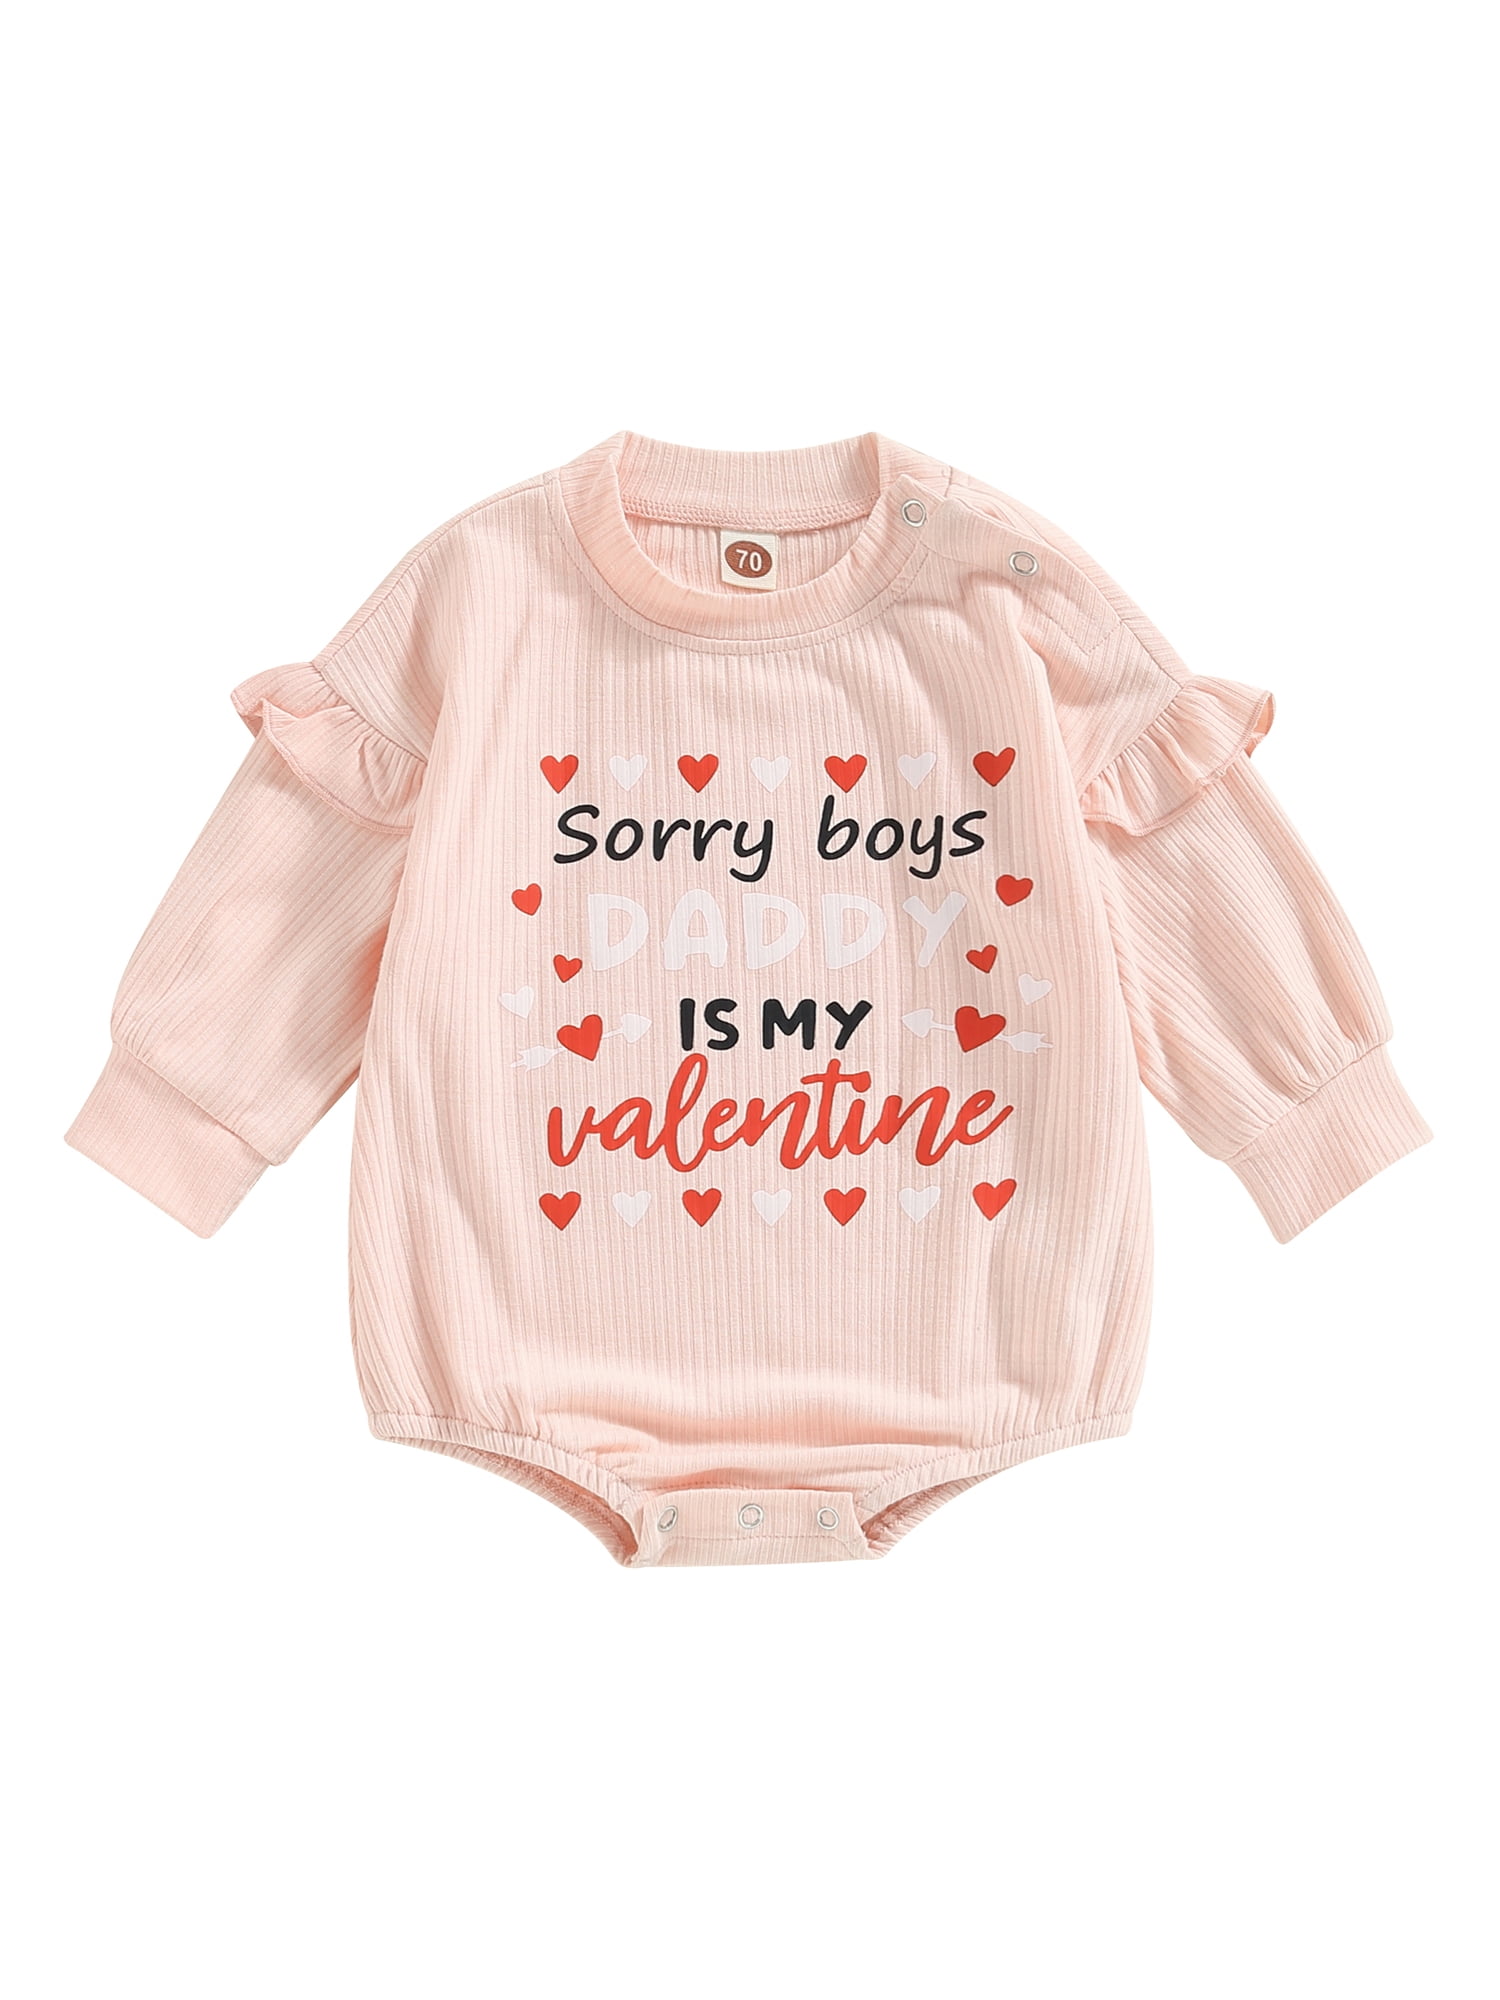 Best Deal for Newborn Baby Girl Valentines Outfits Heart Jumpsuit Long